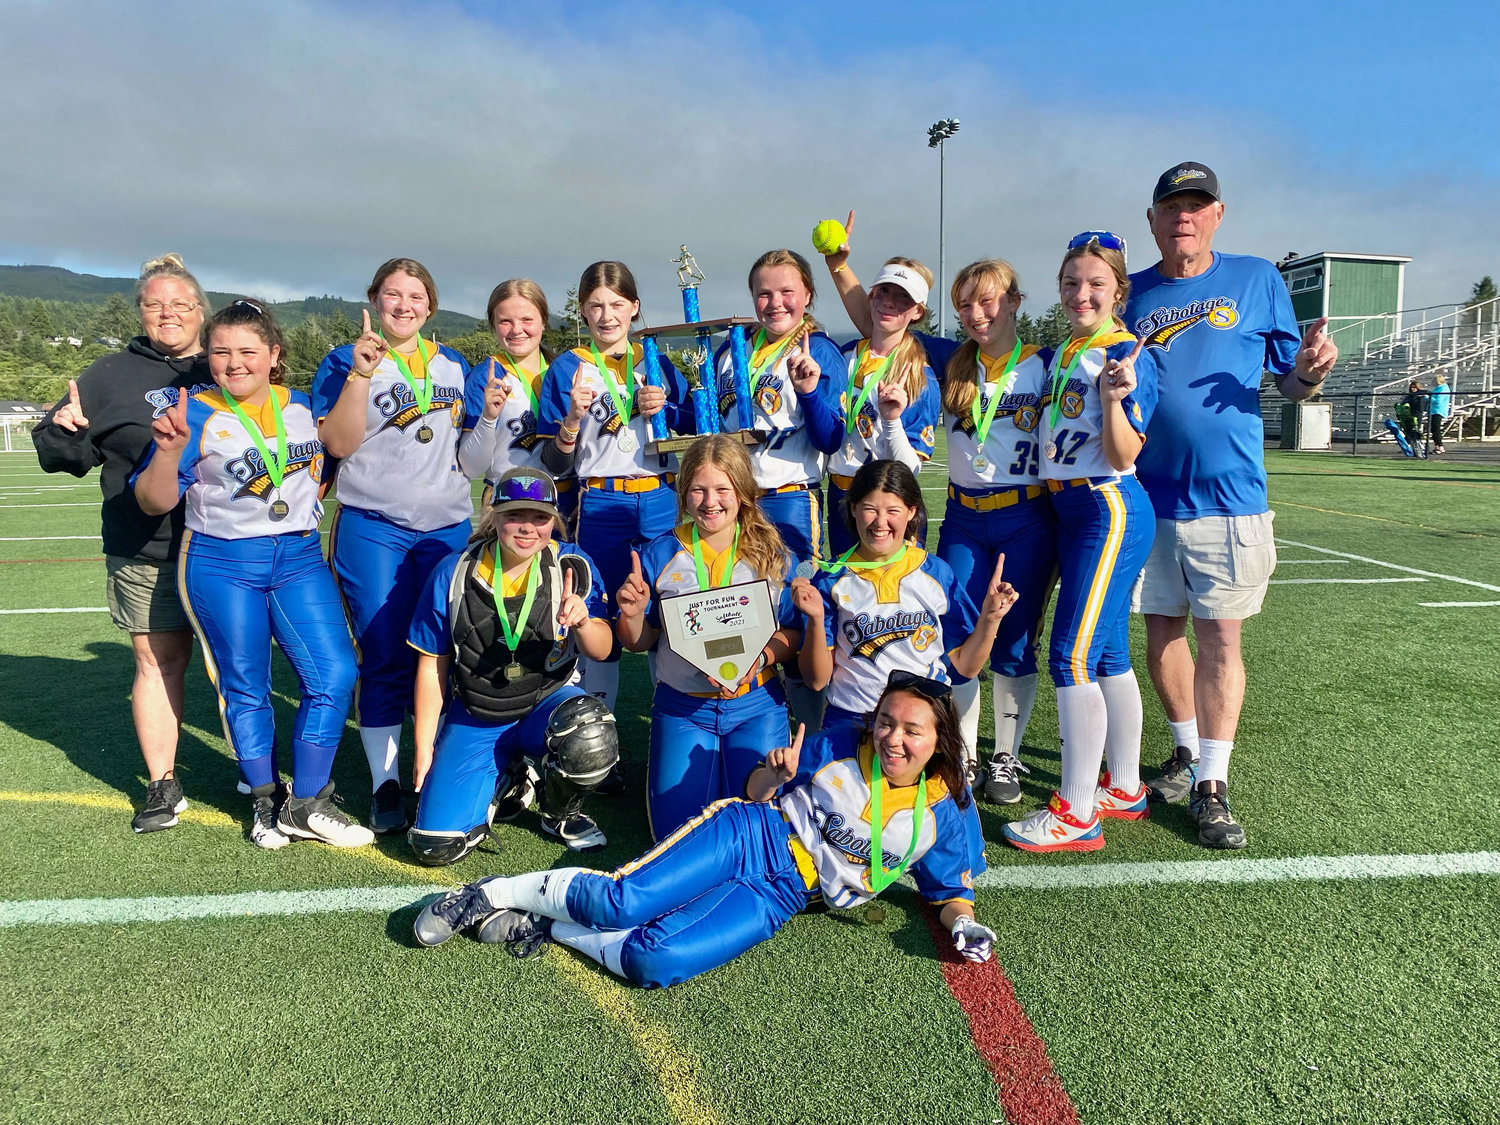 Sabotage NW U14 Baumel Fast Pitch captured the championship in the “Just For Fun tournament July 10 and 11 in Seaside, Oregon. The team went 5-0 and only allowed two errors all weekend..Front row: Sophia Wiggs. Middle row, from left, Maddison Fox, Chloe Bonomi and Jordan Billie. Back row, from left, coach Shannon Baumel, Jordyn Preston, Sophia Milanowski, Brooklyn Sprague, Kylee Lyons, Payton Baumel, Ava Rodman, Makenzie Erickson, Hollynn Wakefield and coach Ken Sack.